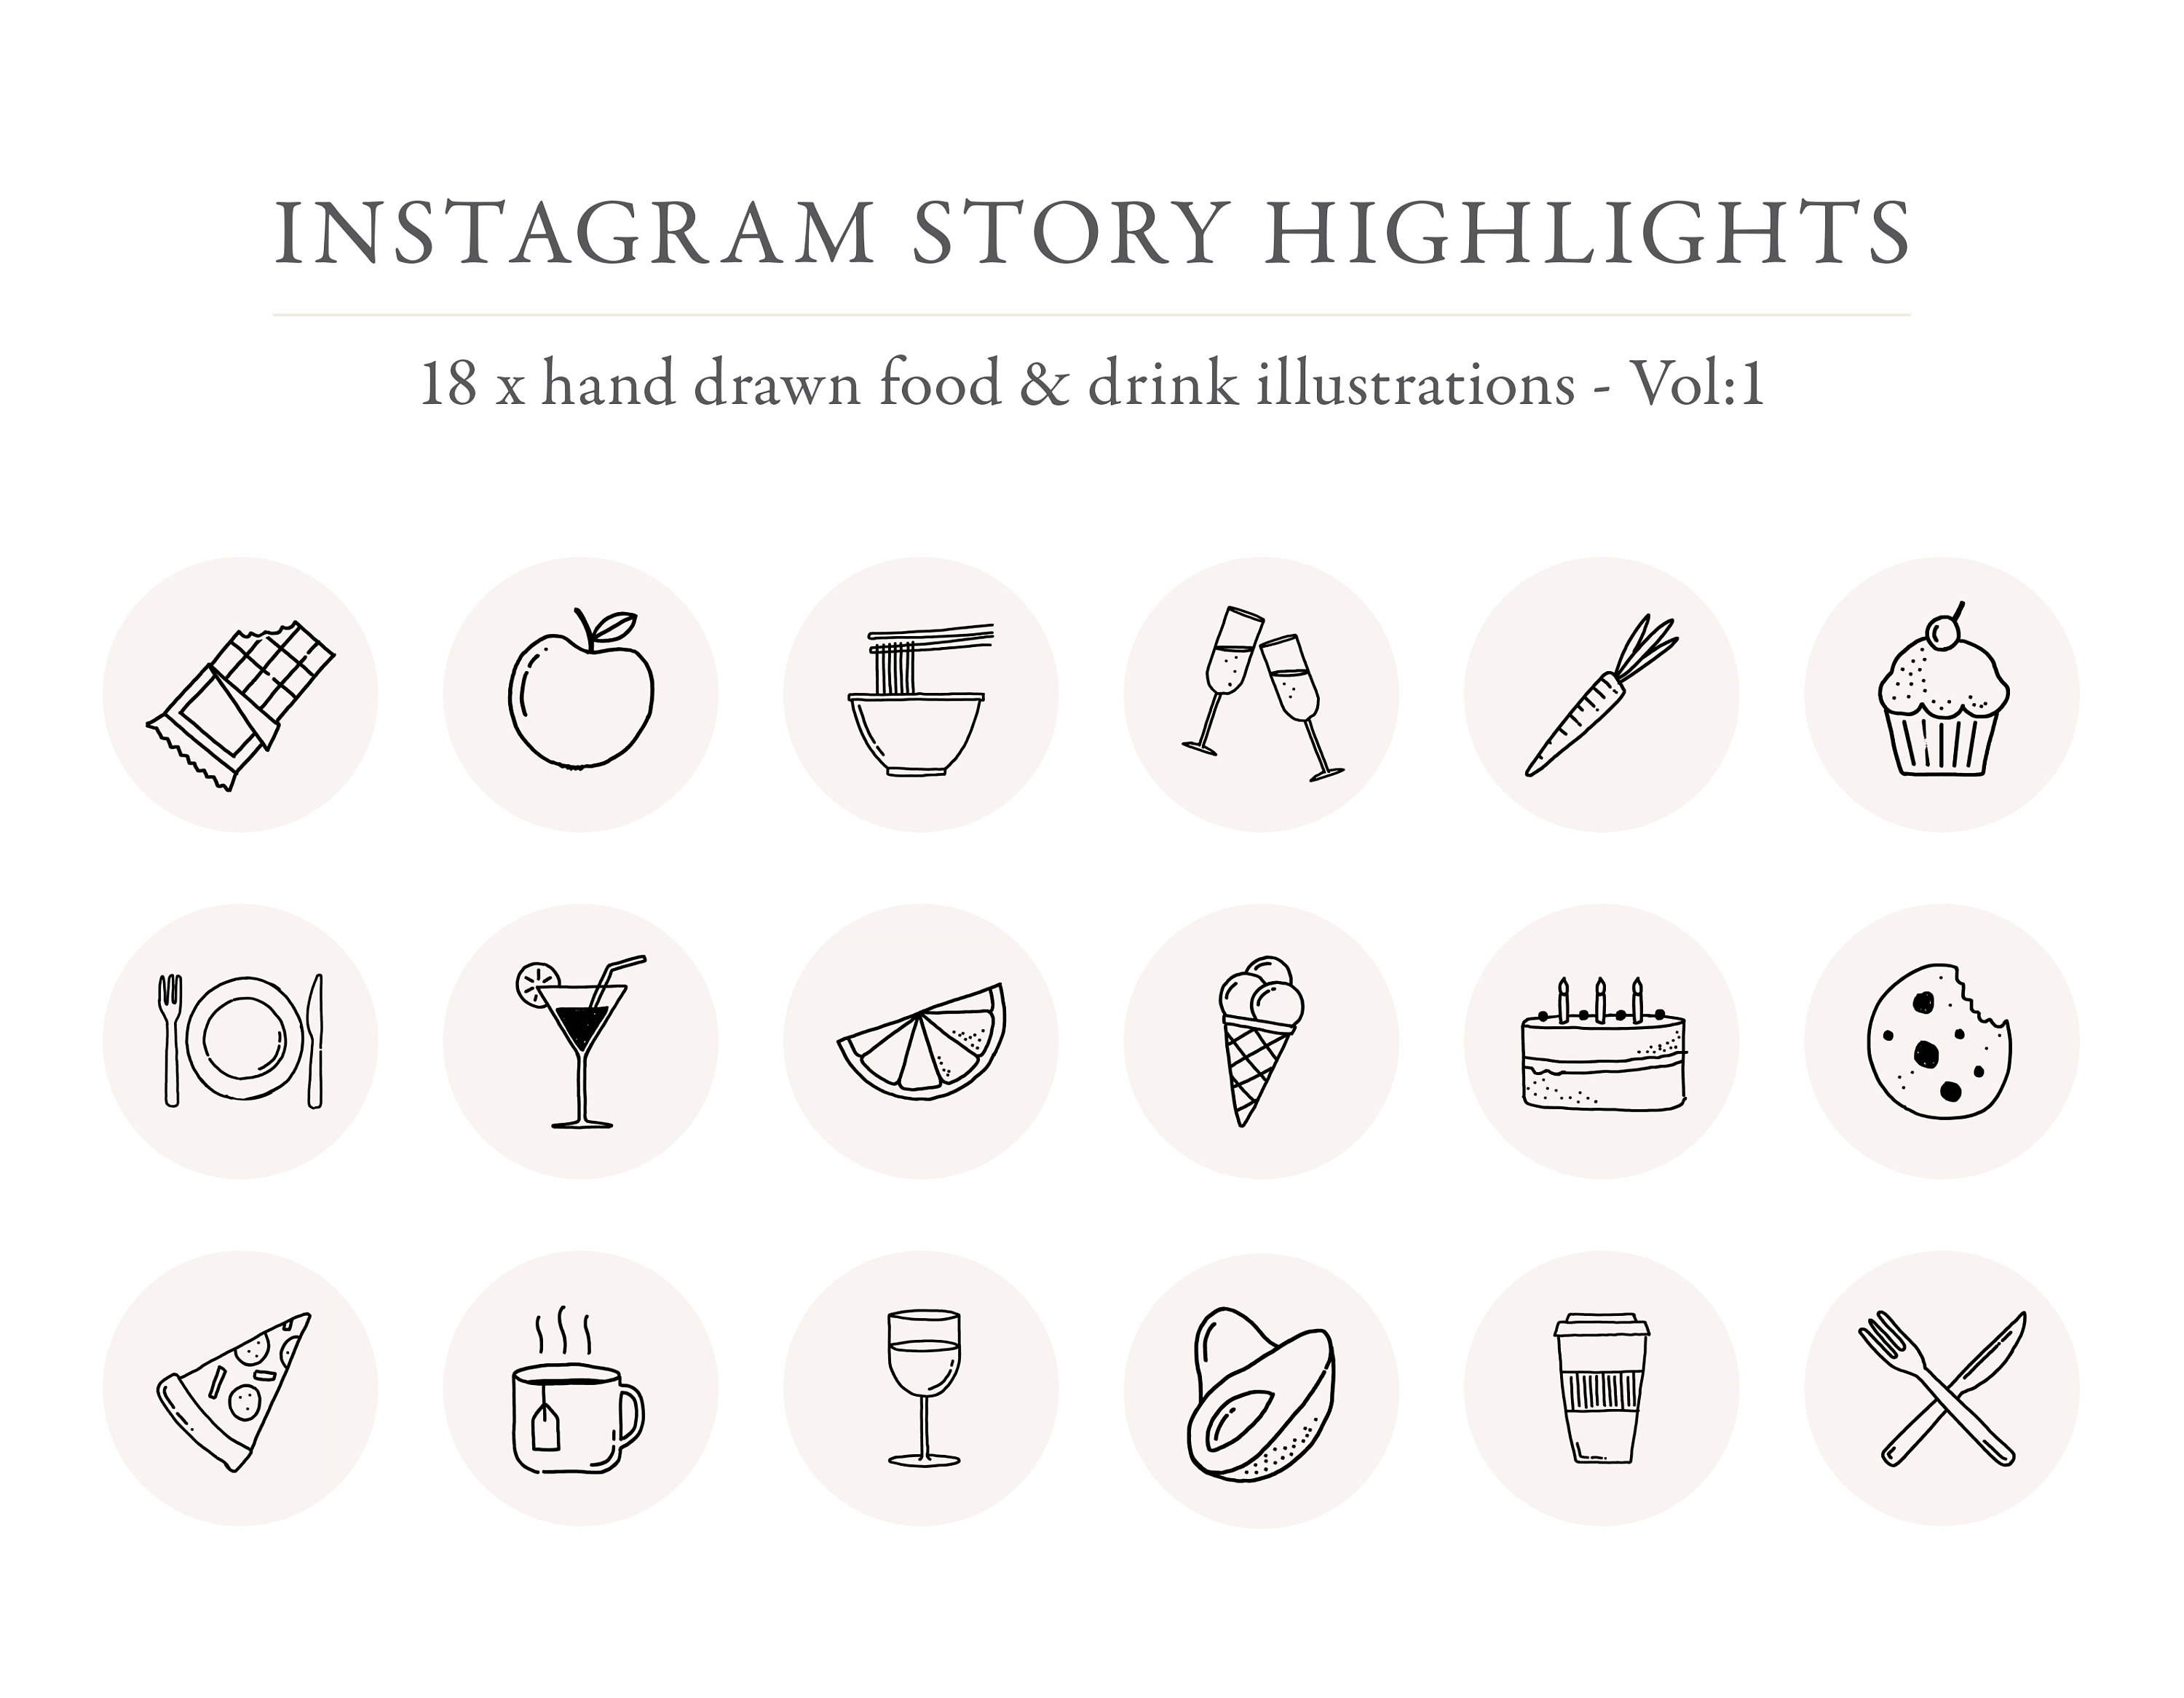 Lifestyle Icons Icons for Instagram Bundle of Instagram Highlight Icons Social Media Branding Instagram Highlight Icons